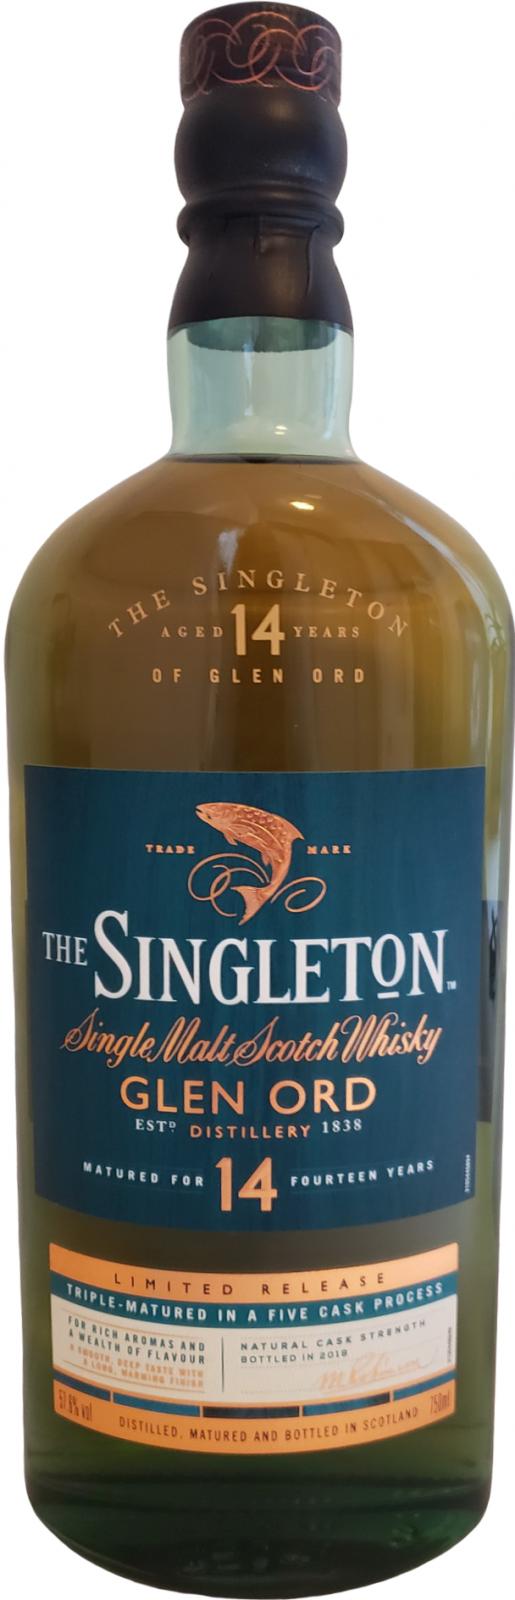 The Singleton of Glen Ord 14yo Diageo Special Releases 2018 Triple-Matured in A Five Cask Process 57.6% 750ml